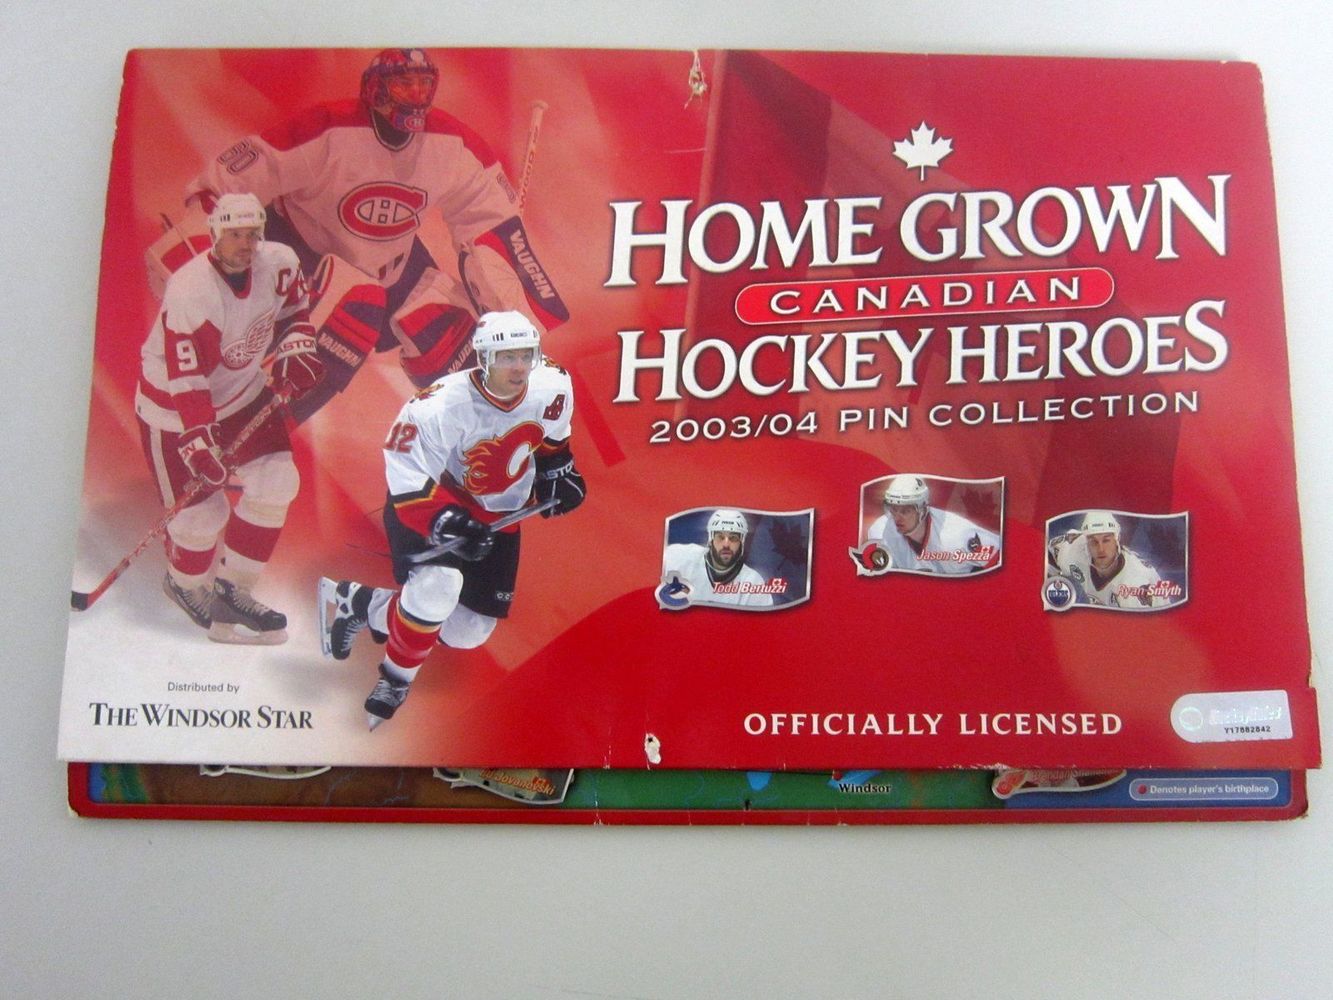 HOME GROWN CANADIAN HOCKEY HEROES 2003/04 PIN COLLECTION Full Set